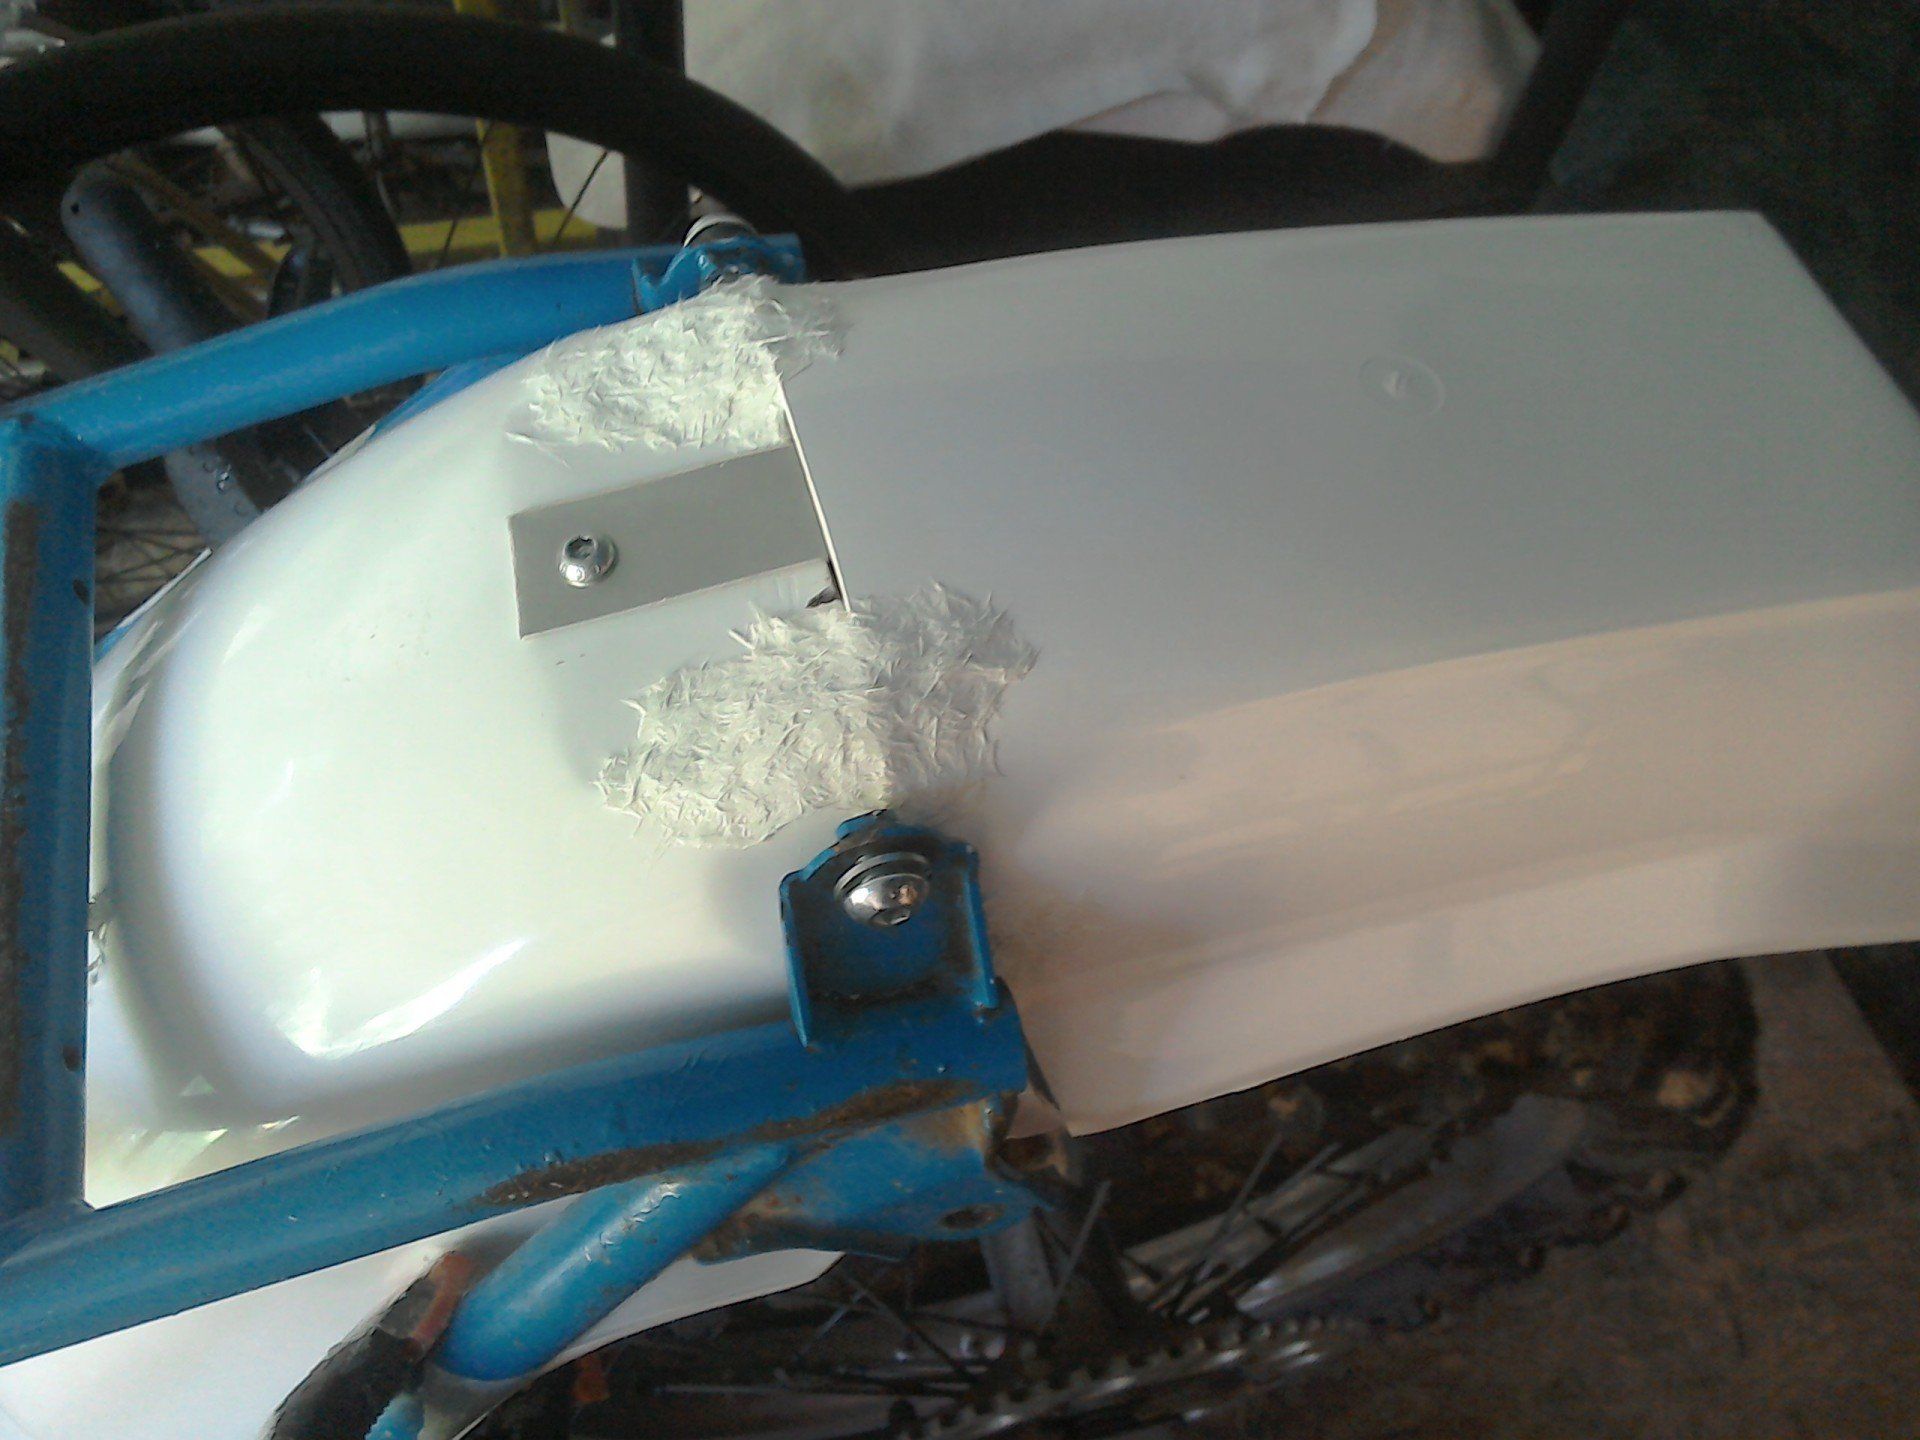 Temporary joining two mudguards together